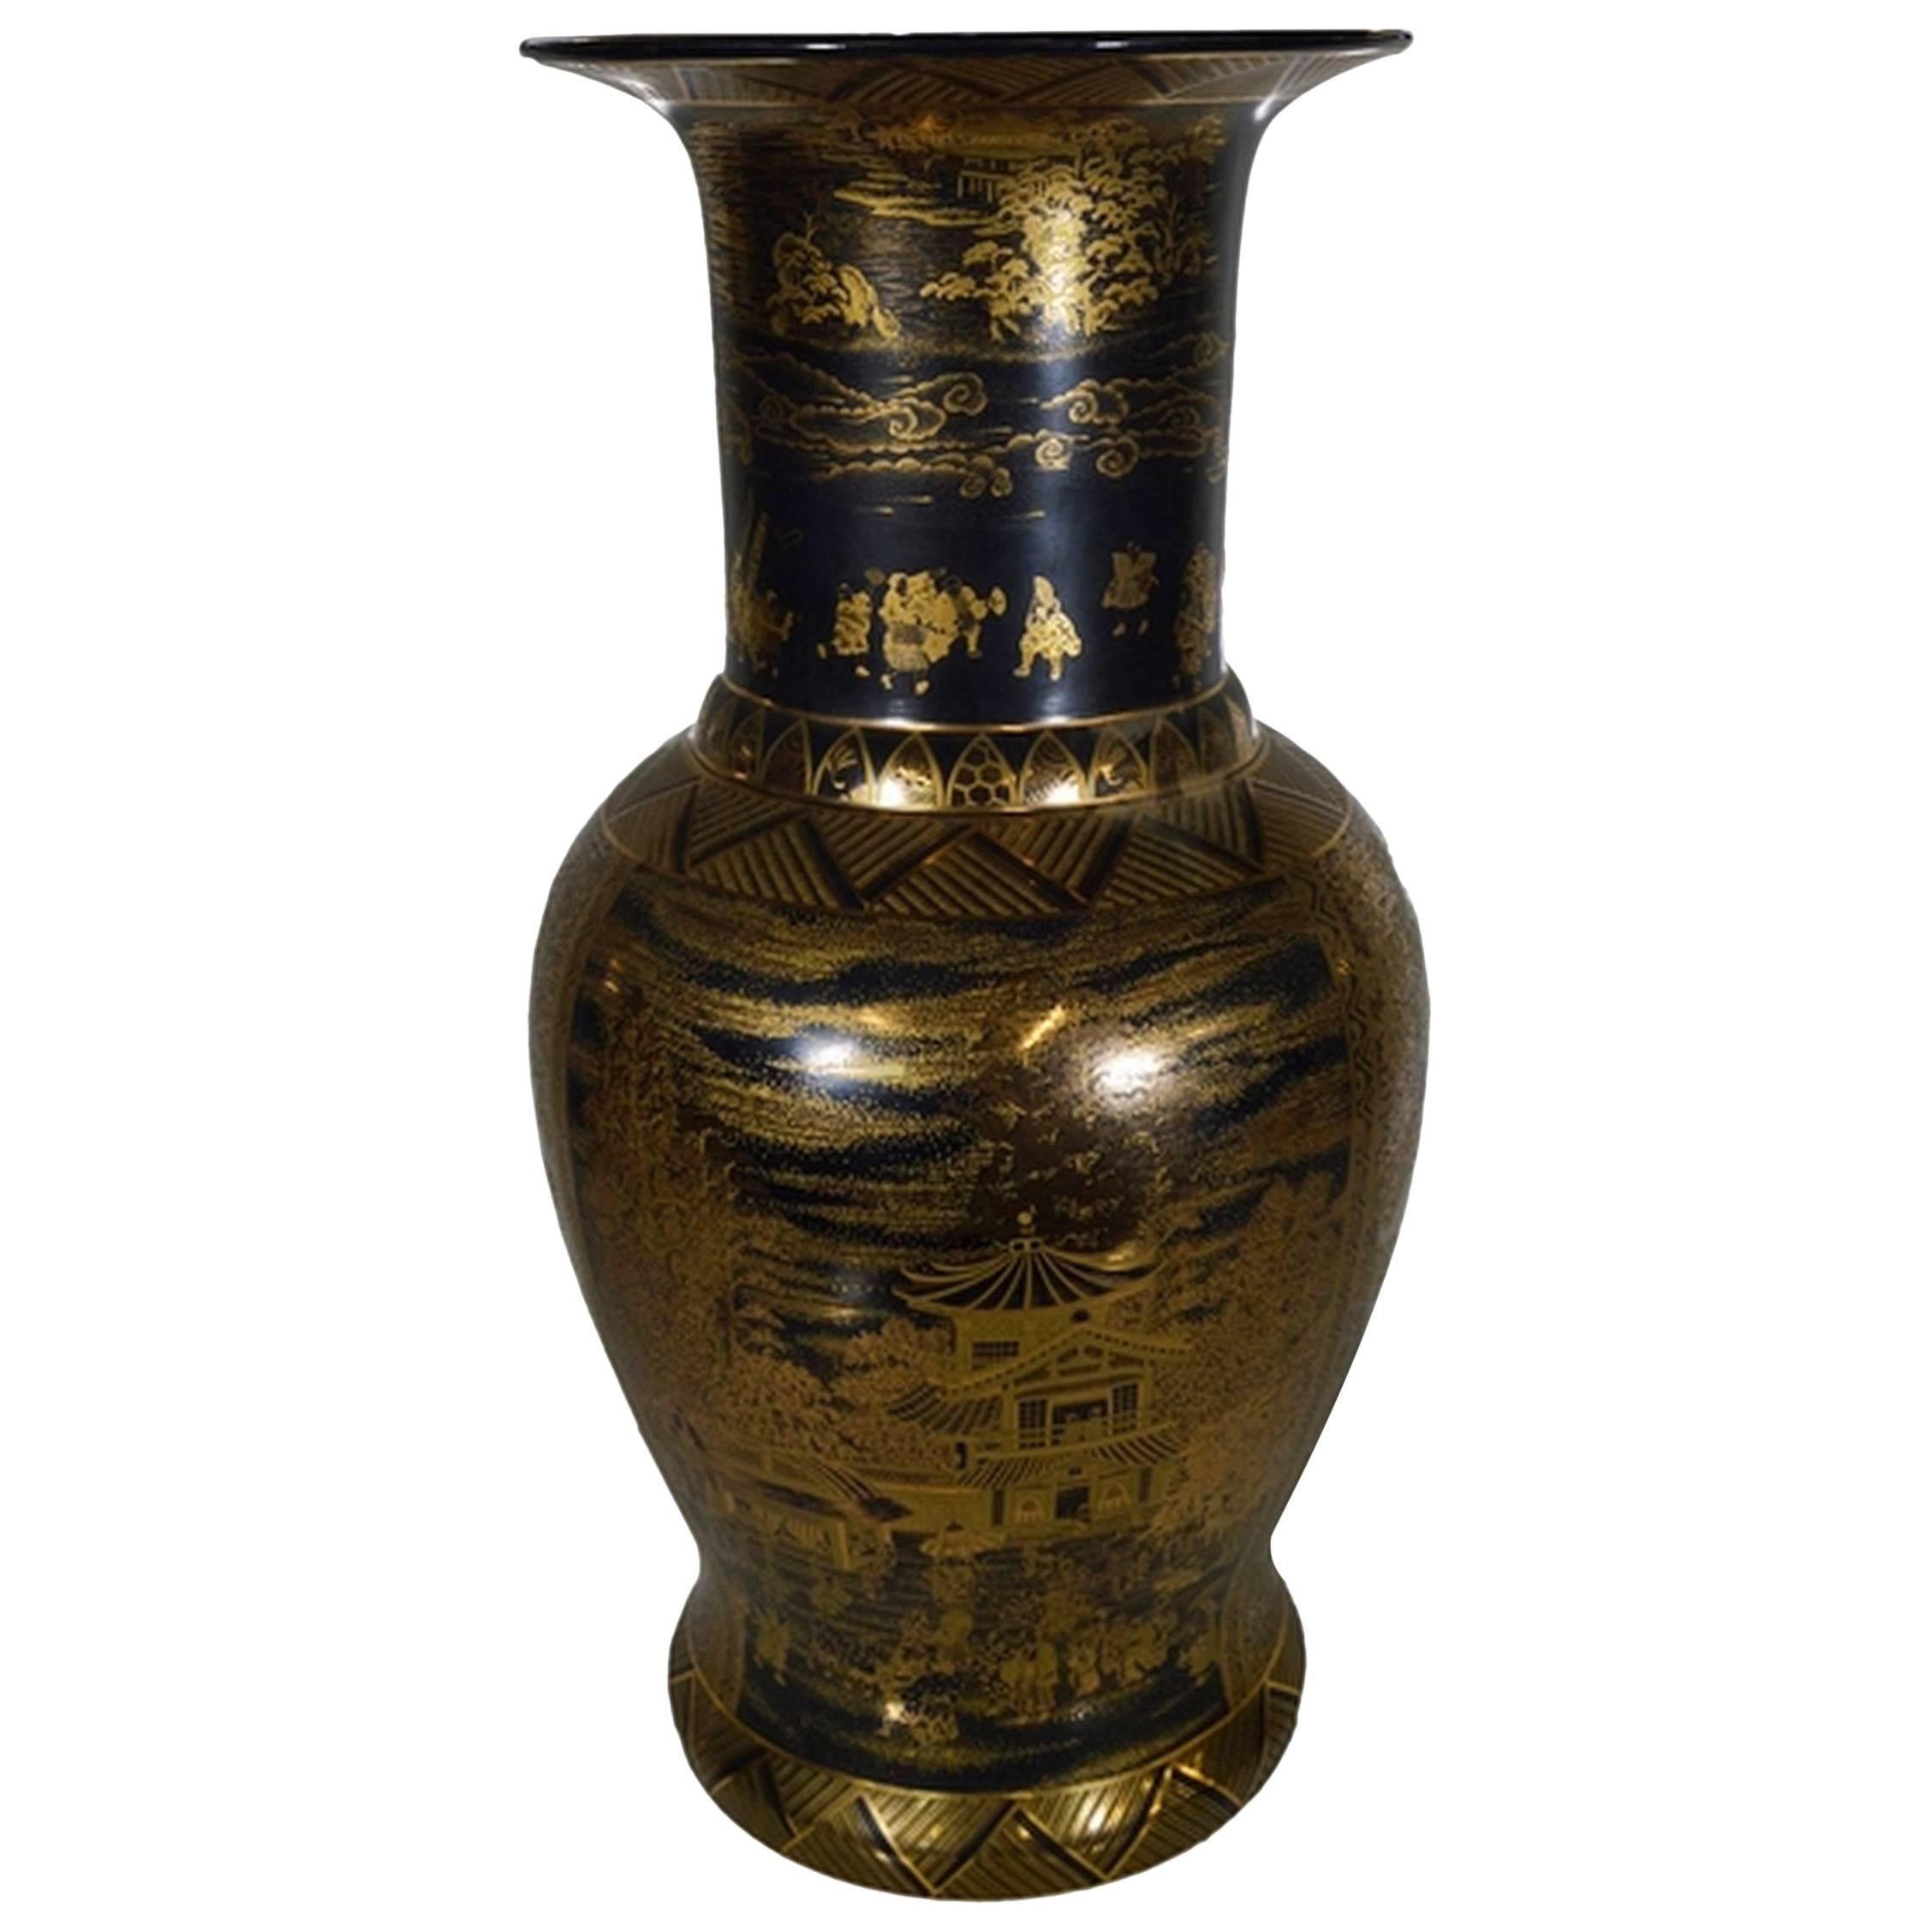 Vintage Black and Golden Hand-Painted Porcelain Vase from China, 20th Century For Sale